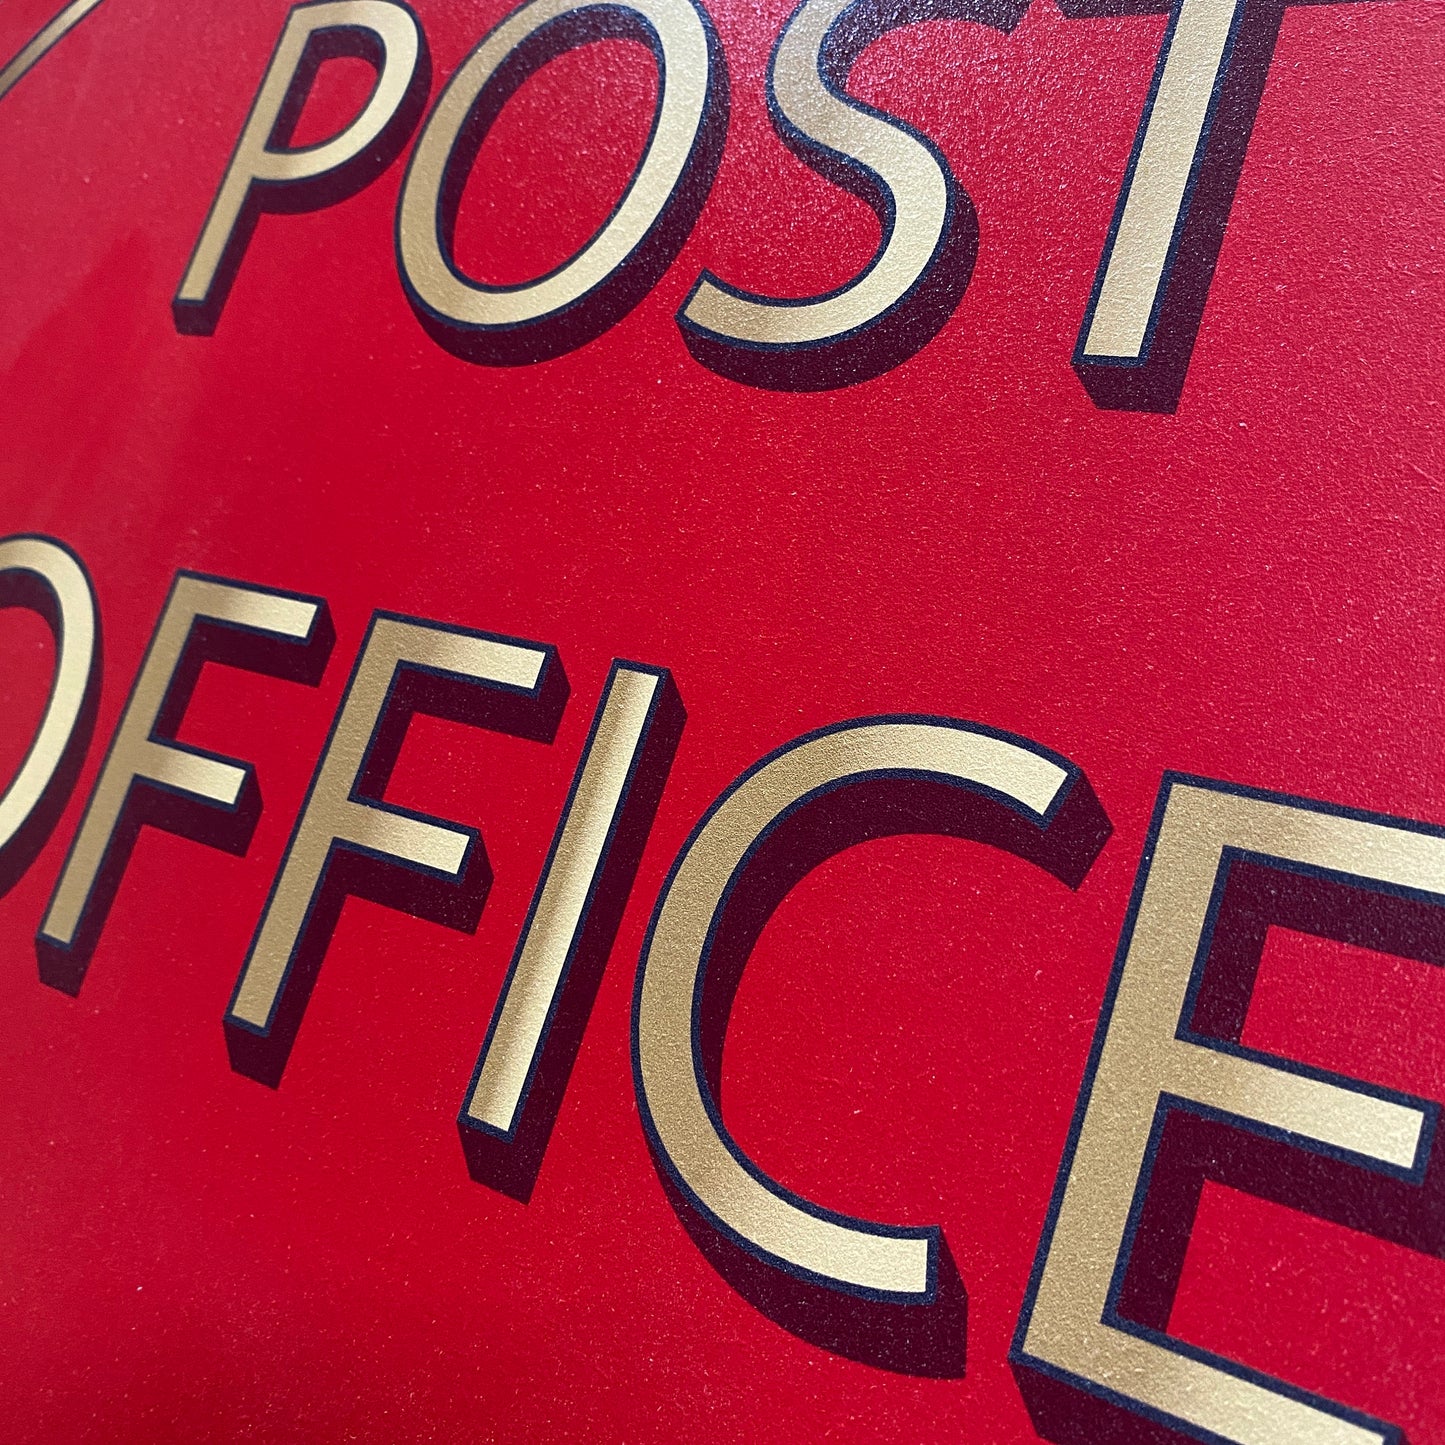 Traditional Post Office Sign